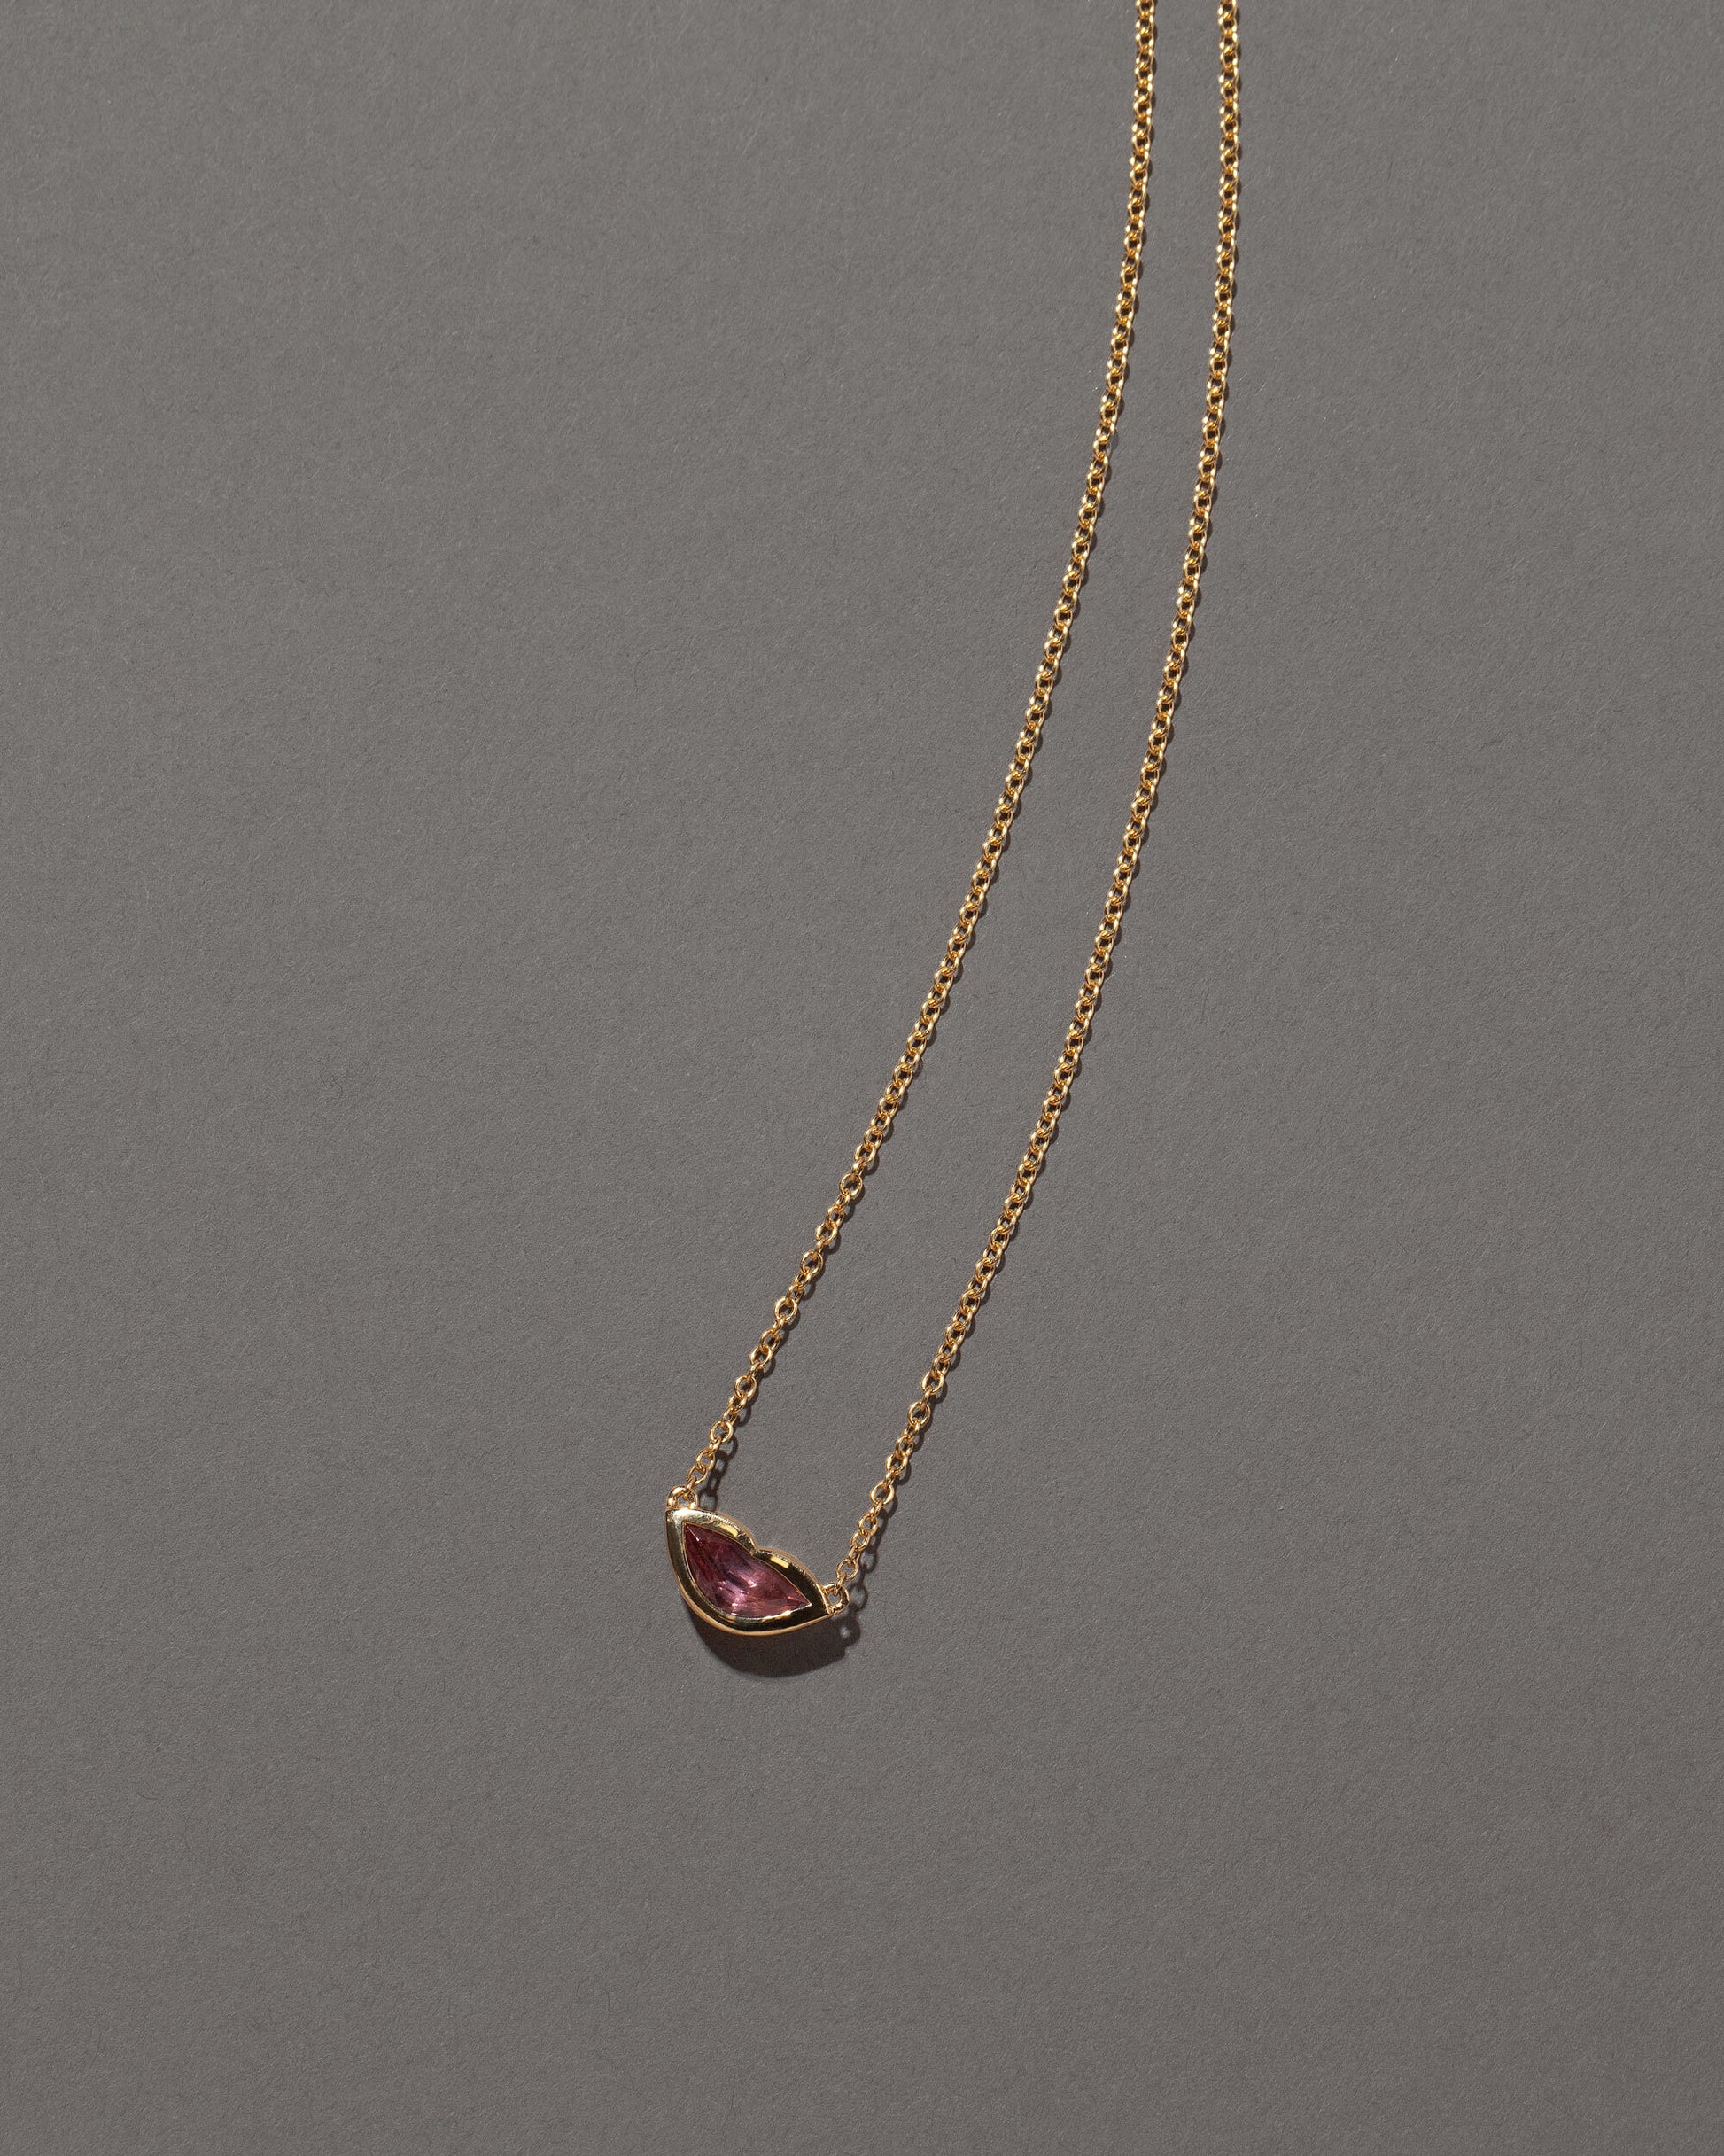 Closeup details of the Peach Spinel Lover's Kiss Necklace on grey color background.